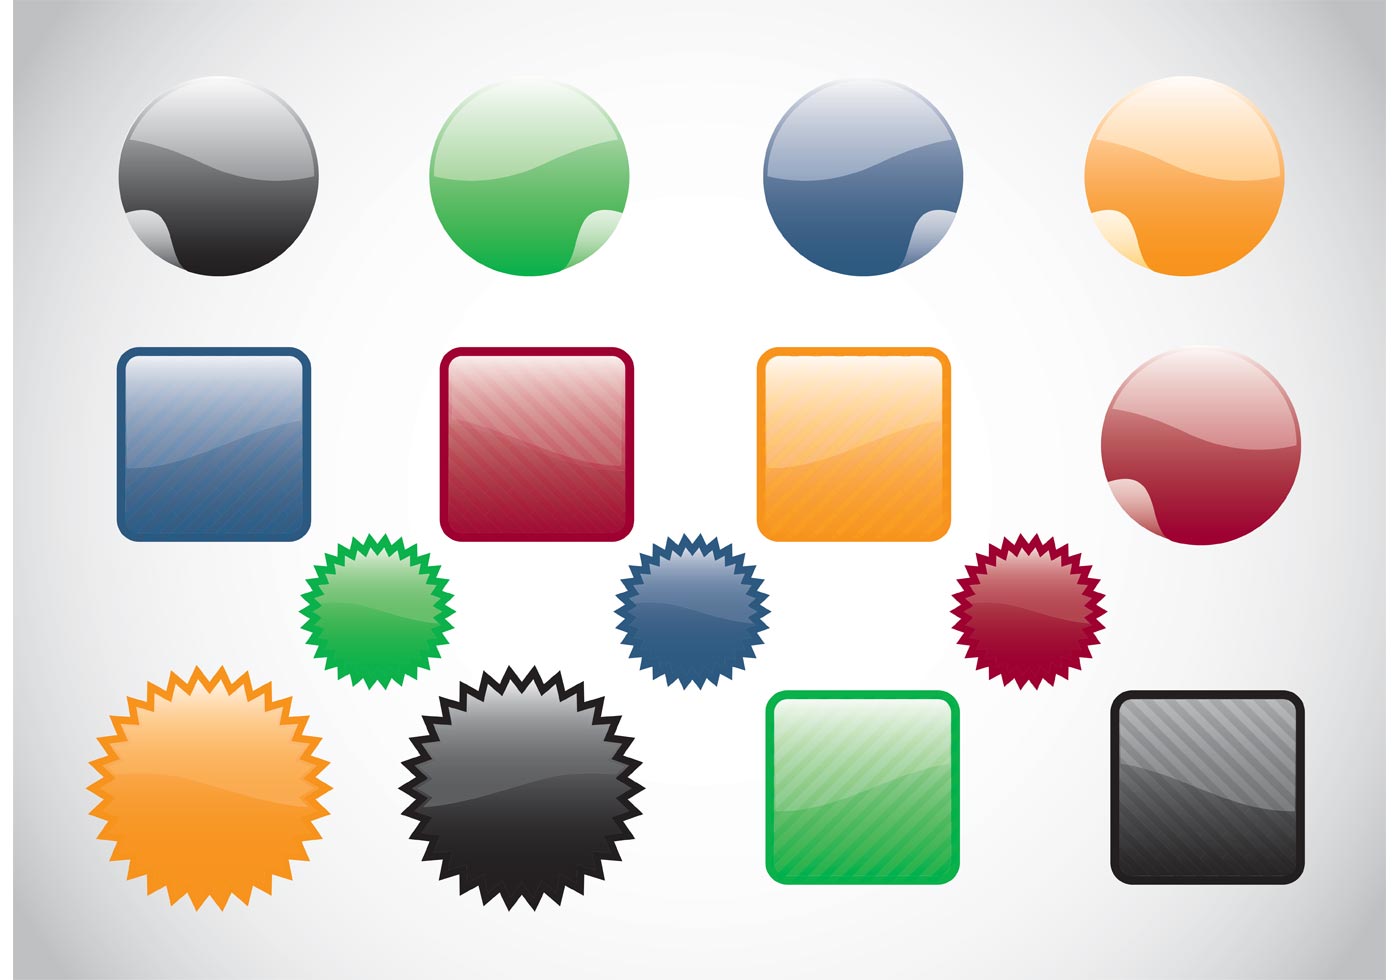 Web Buttons Vectors Download Free Vector Art Stock Graphics And Images